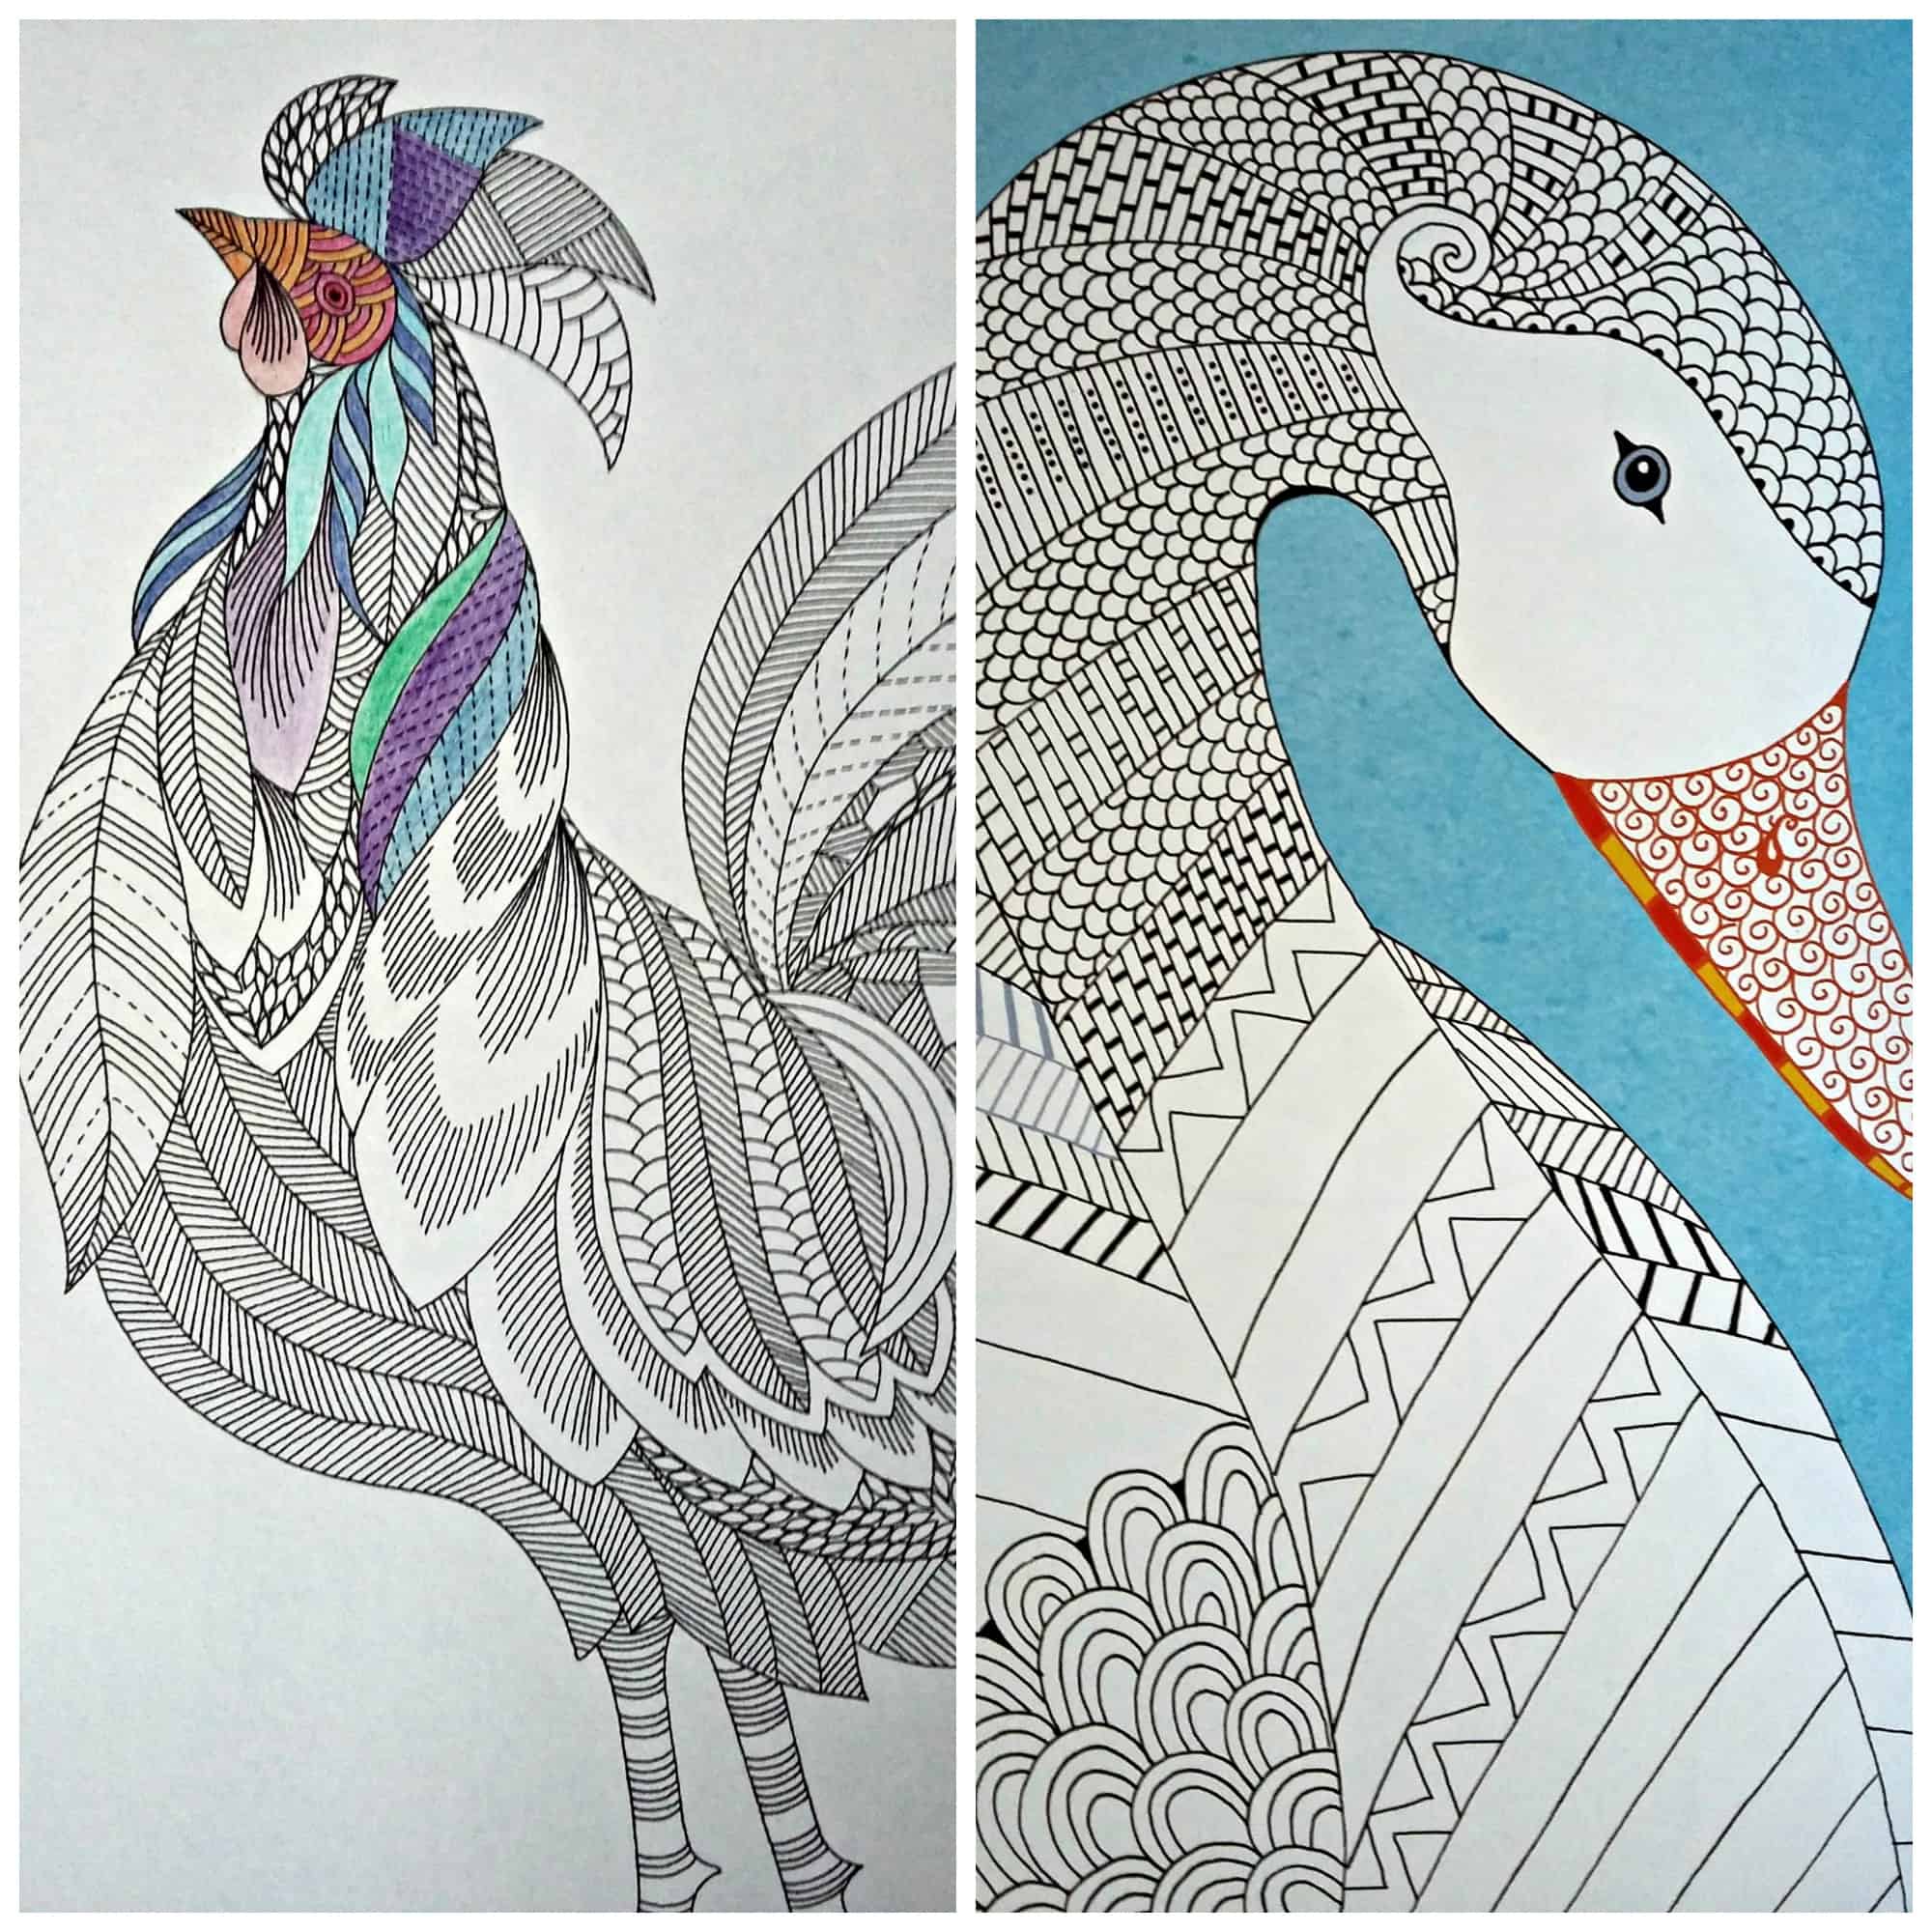 Colouring Books For Adults: Why You Should Get One - Birch And Button